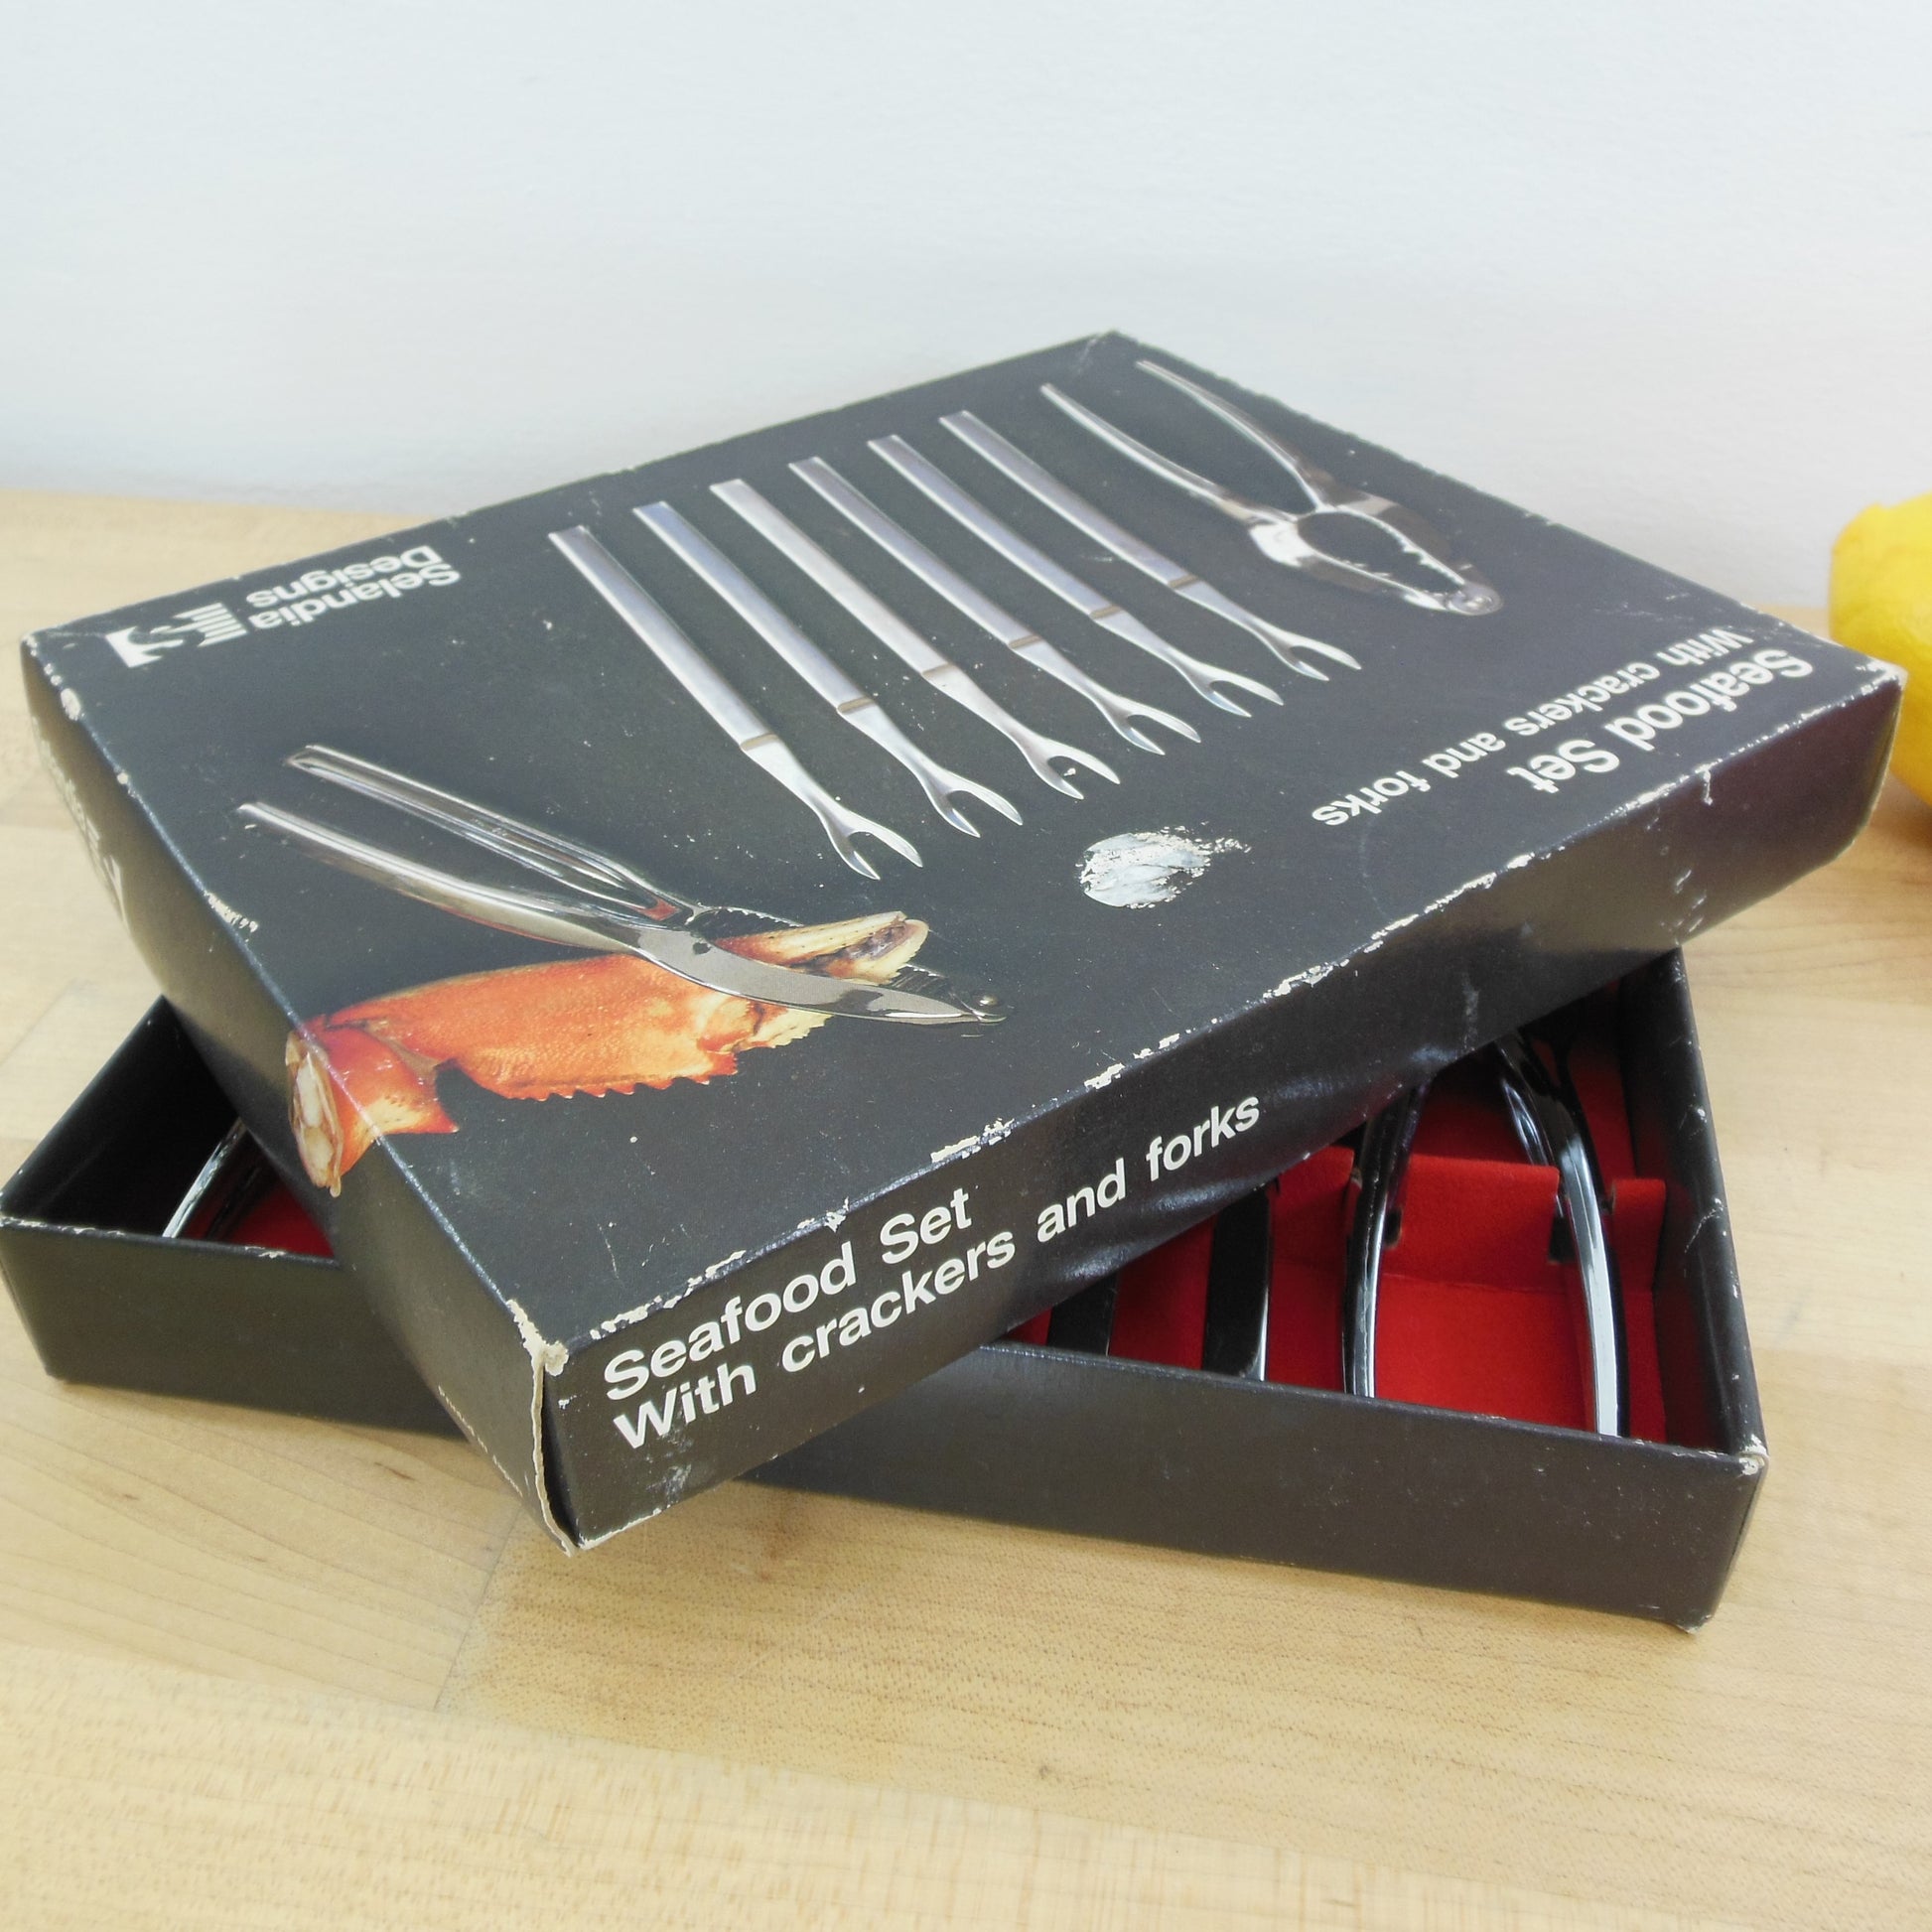 Selandia Designs Boxed Seafood Set Crab Crackers Forks Stainless used